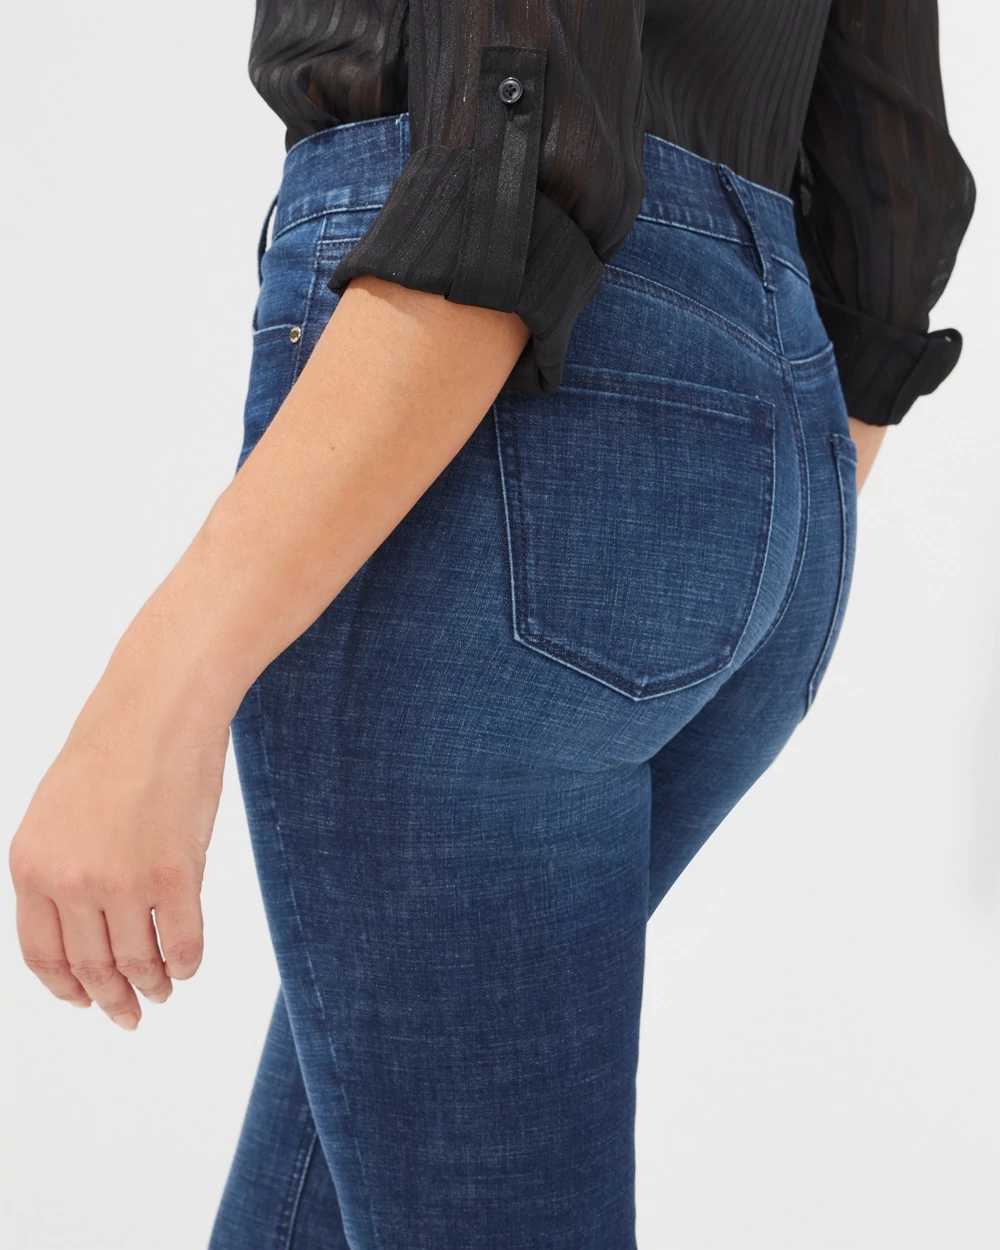 Outlet WHBM Mid Rise Slim Bootcut Jeans click to view larger image.